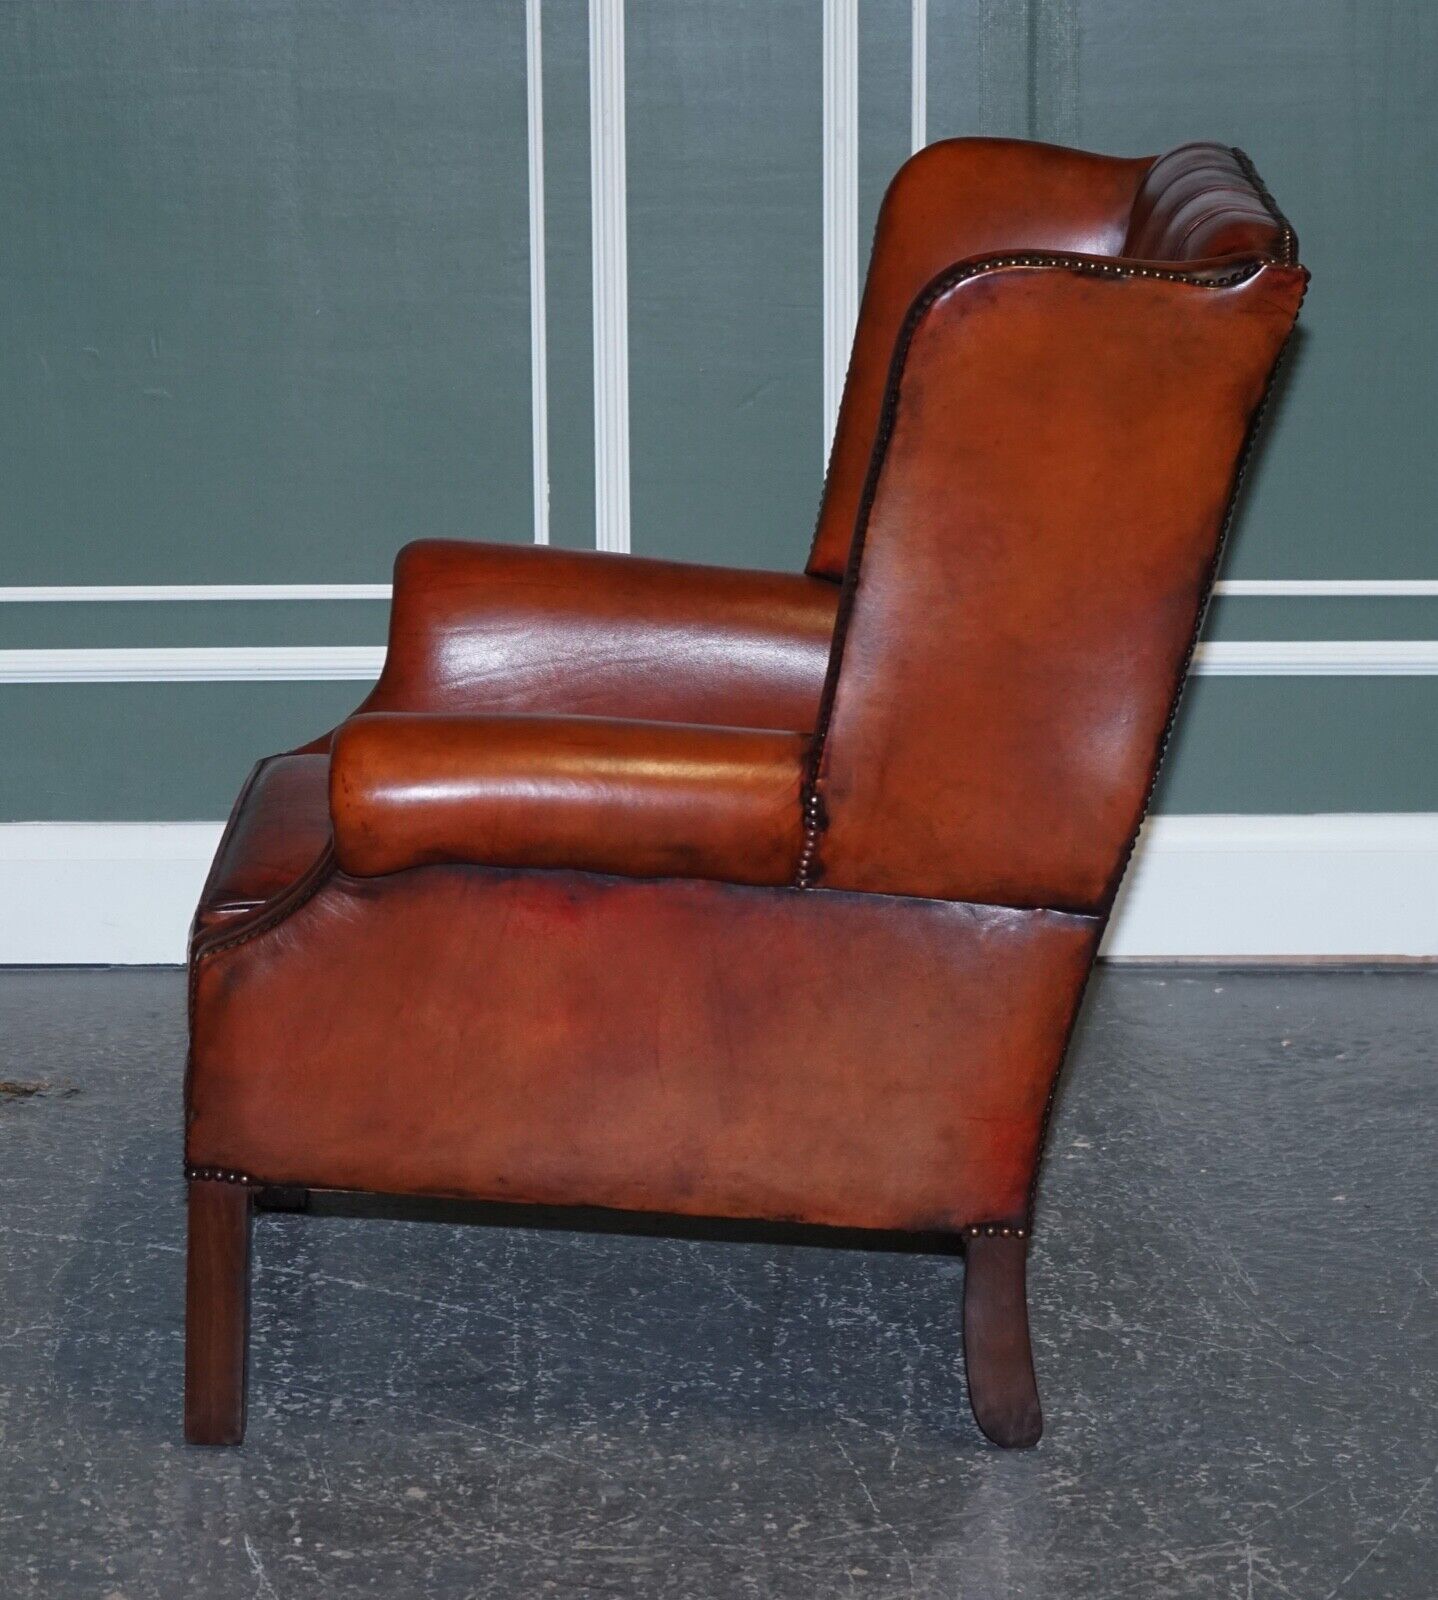 STUNNING PAIR OF BURGUNDY BROWN LEATHER HAND DYED WINGBACK CHAIRS